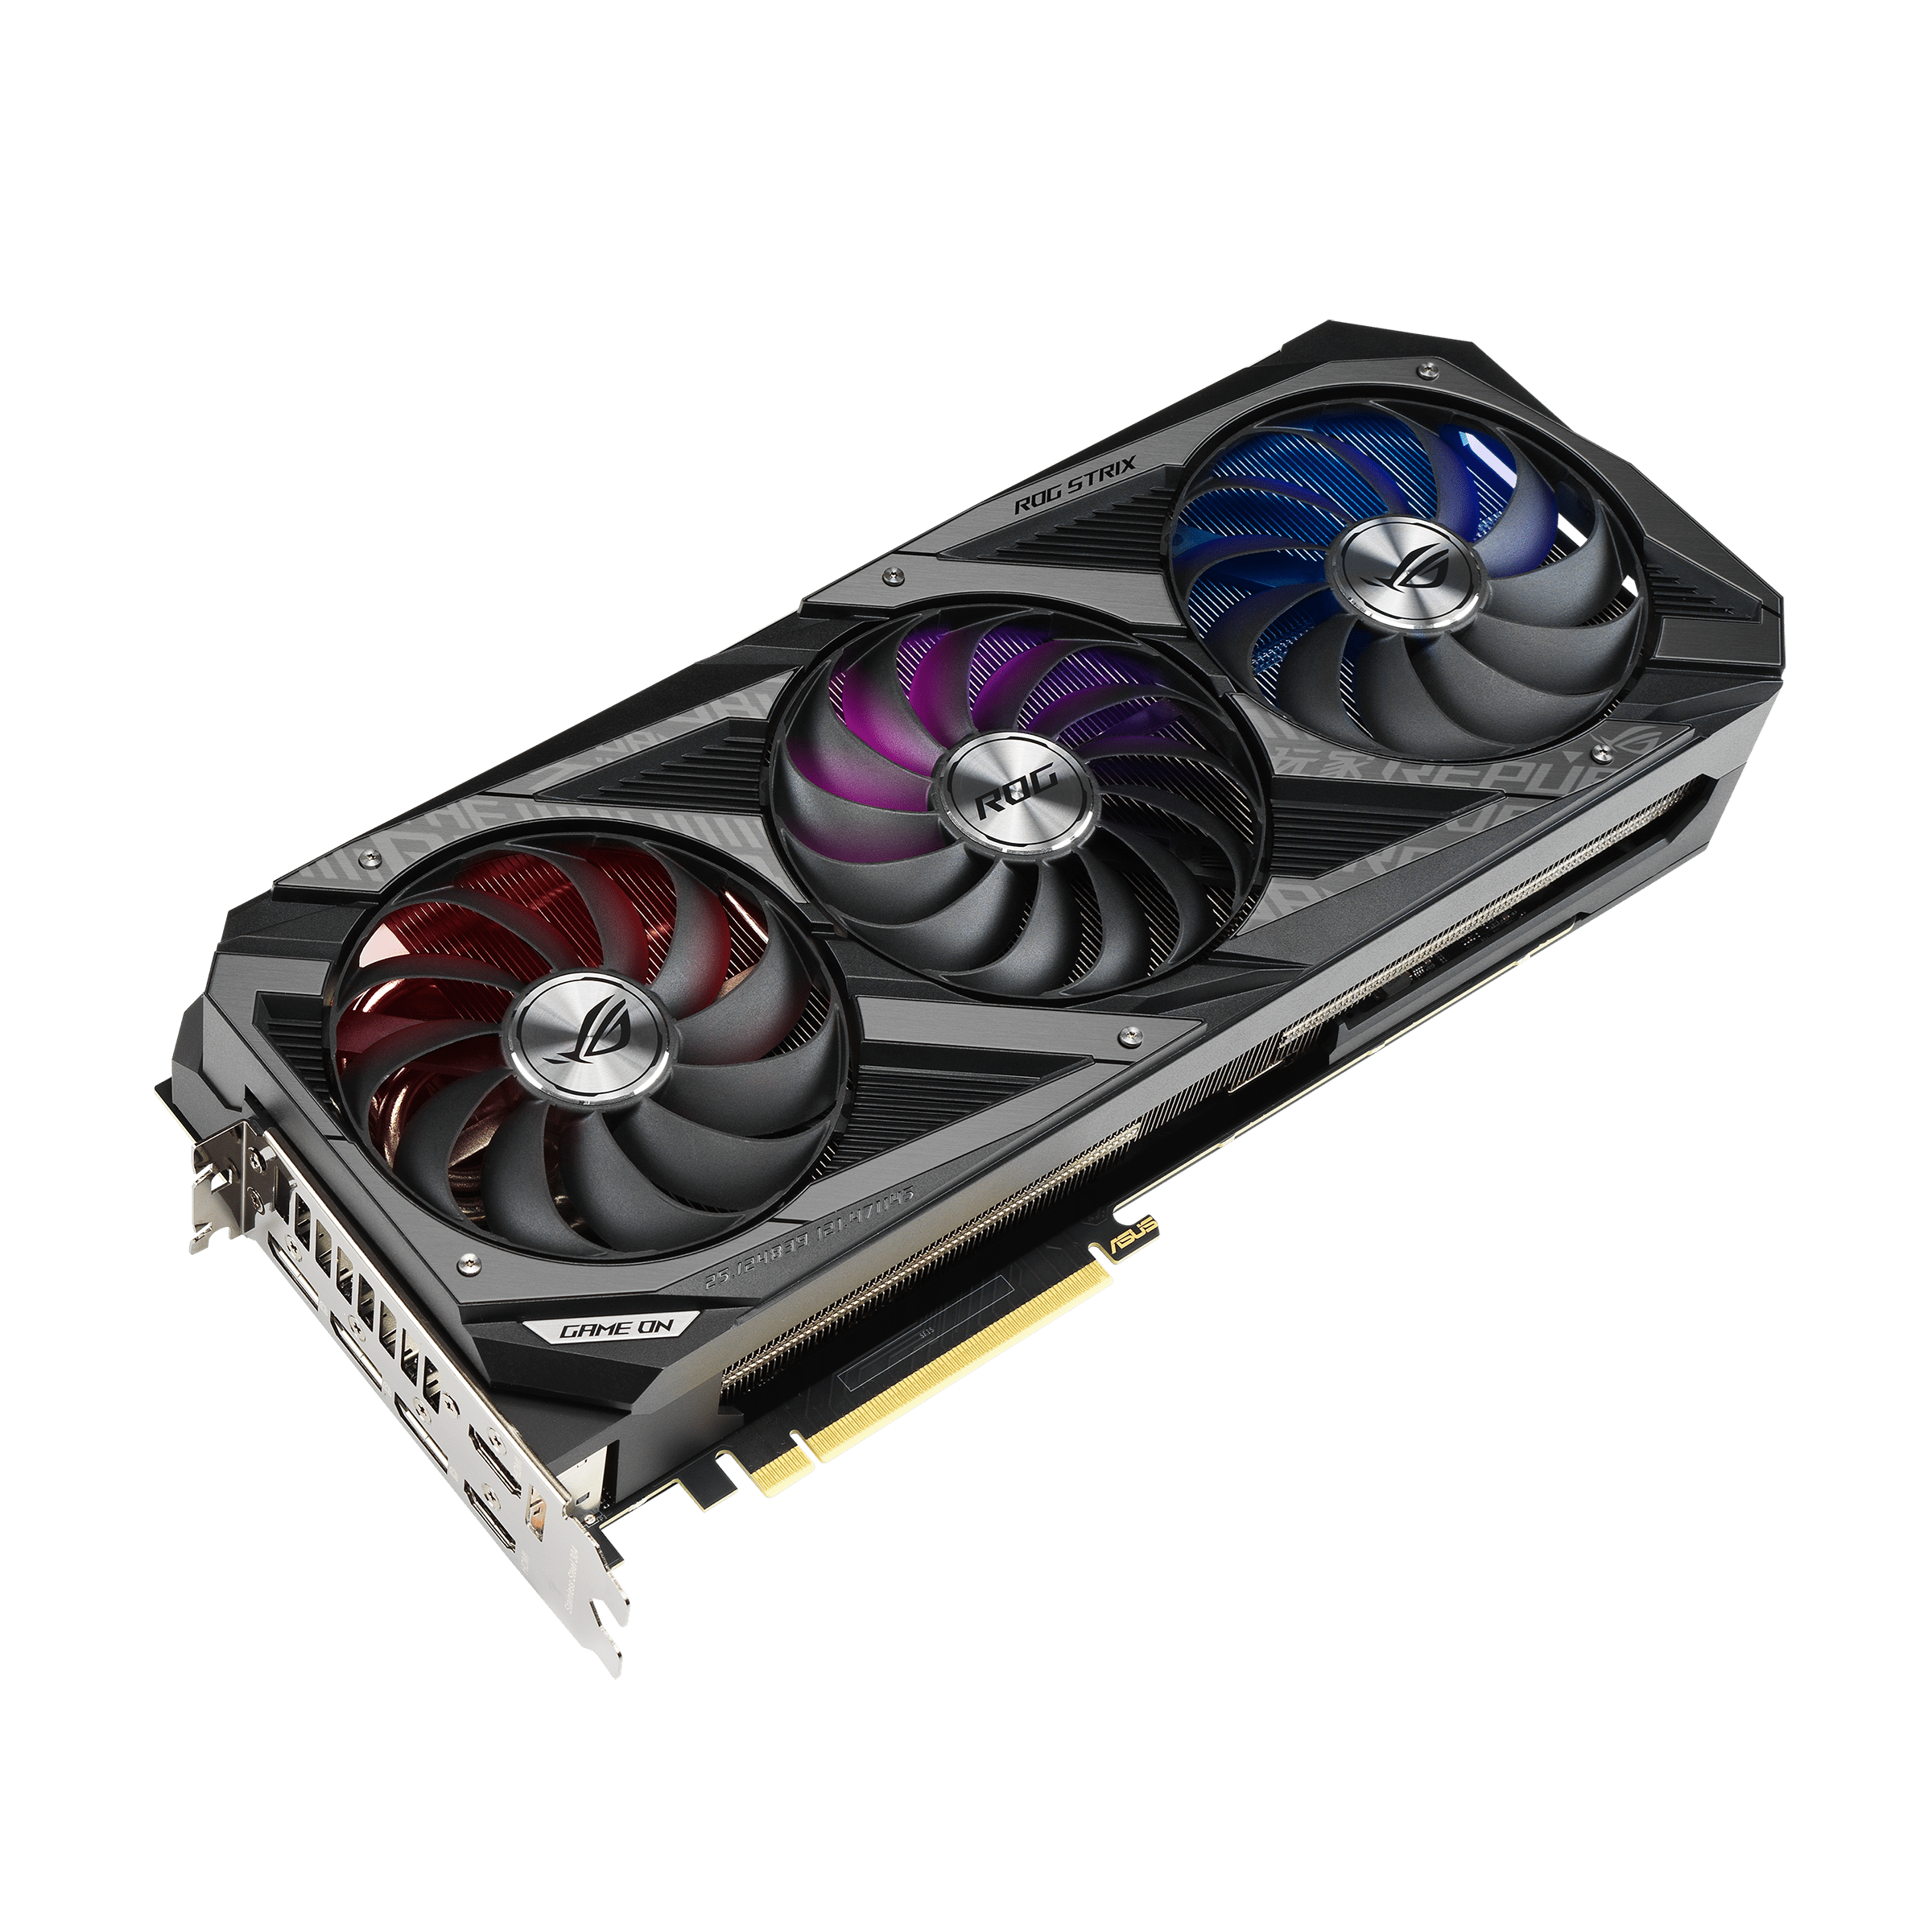 See the Asus Graphics Card Collection at CHLGadgets